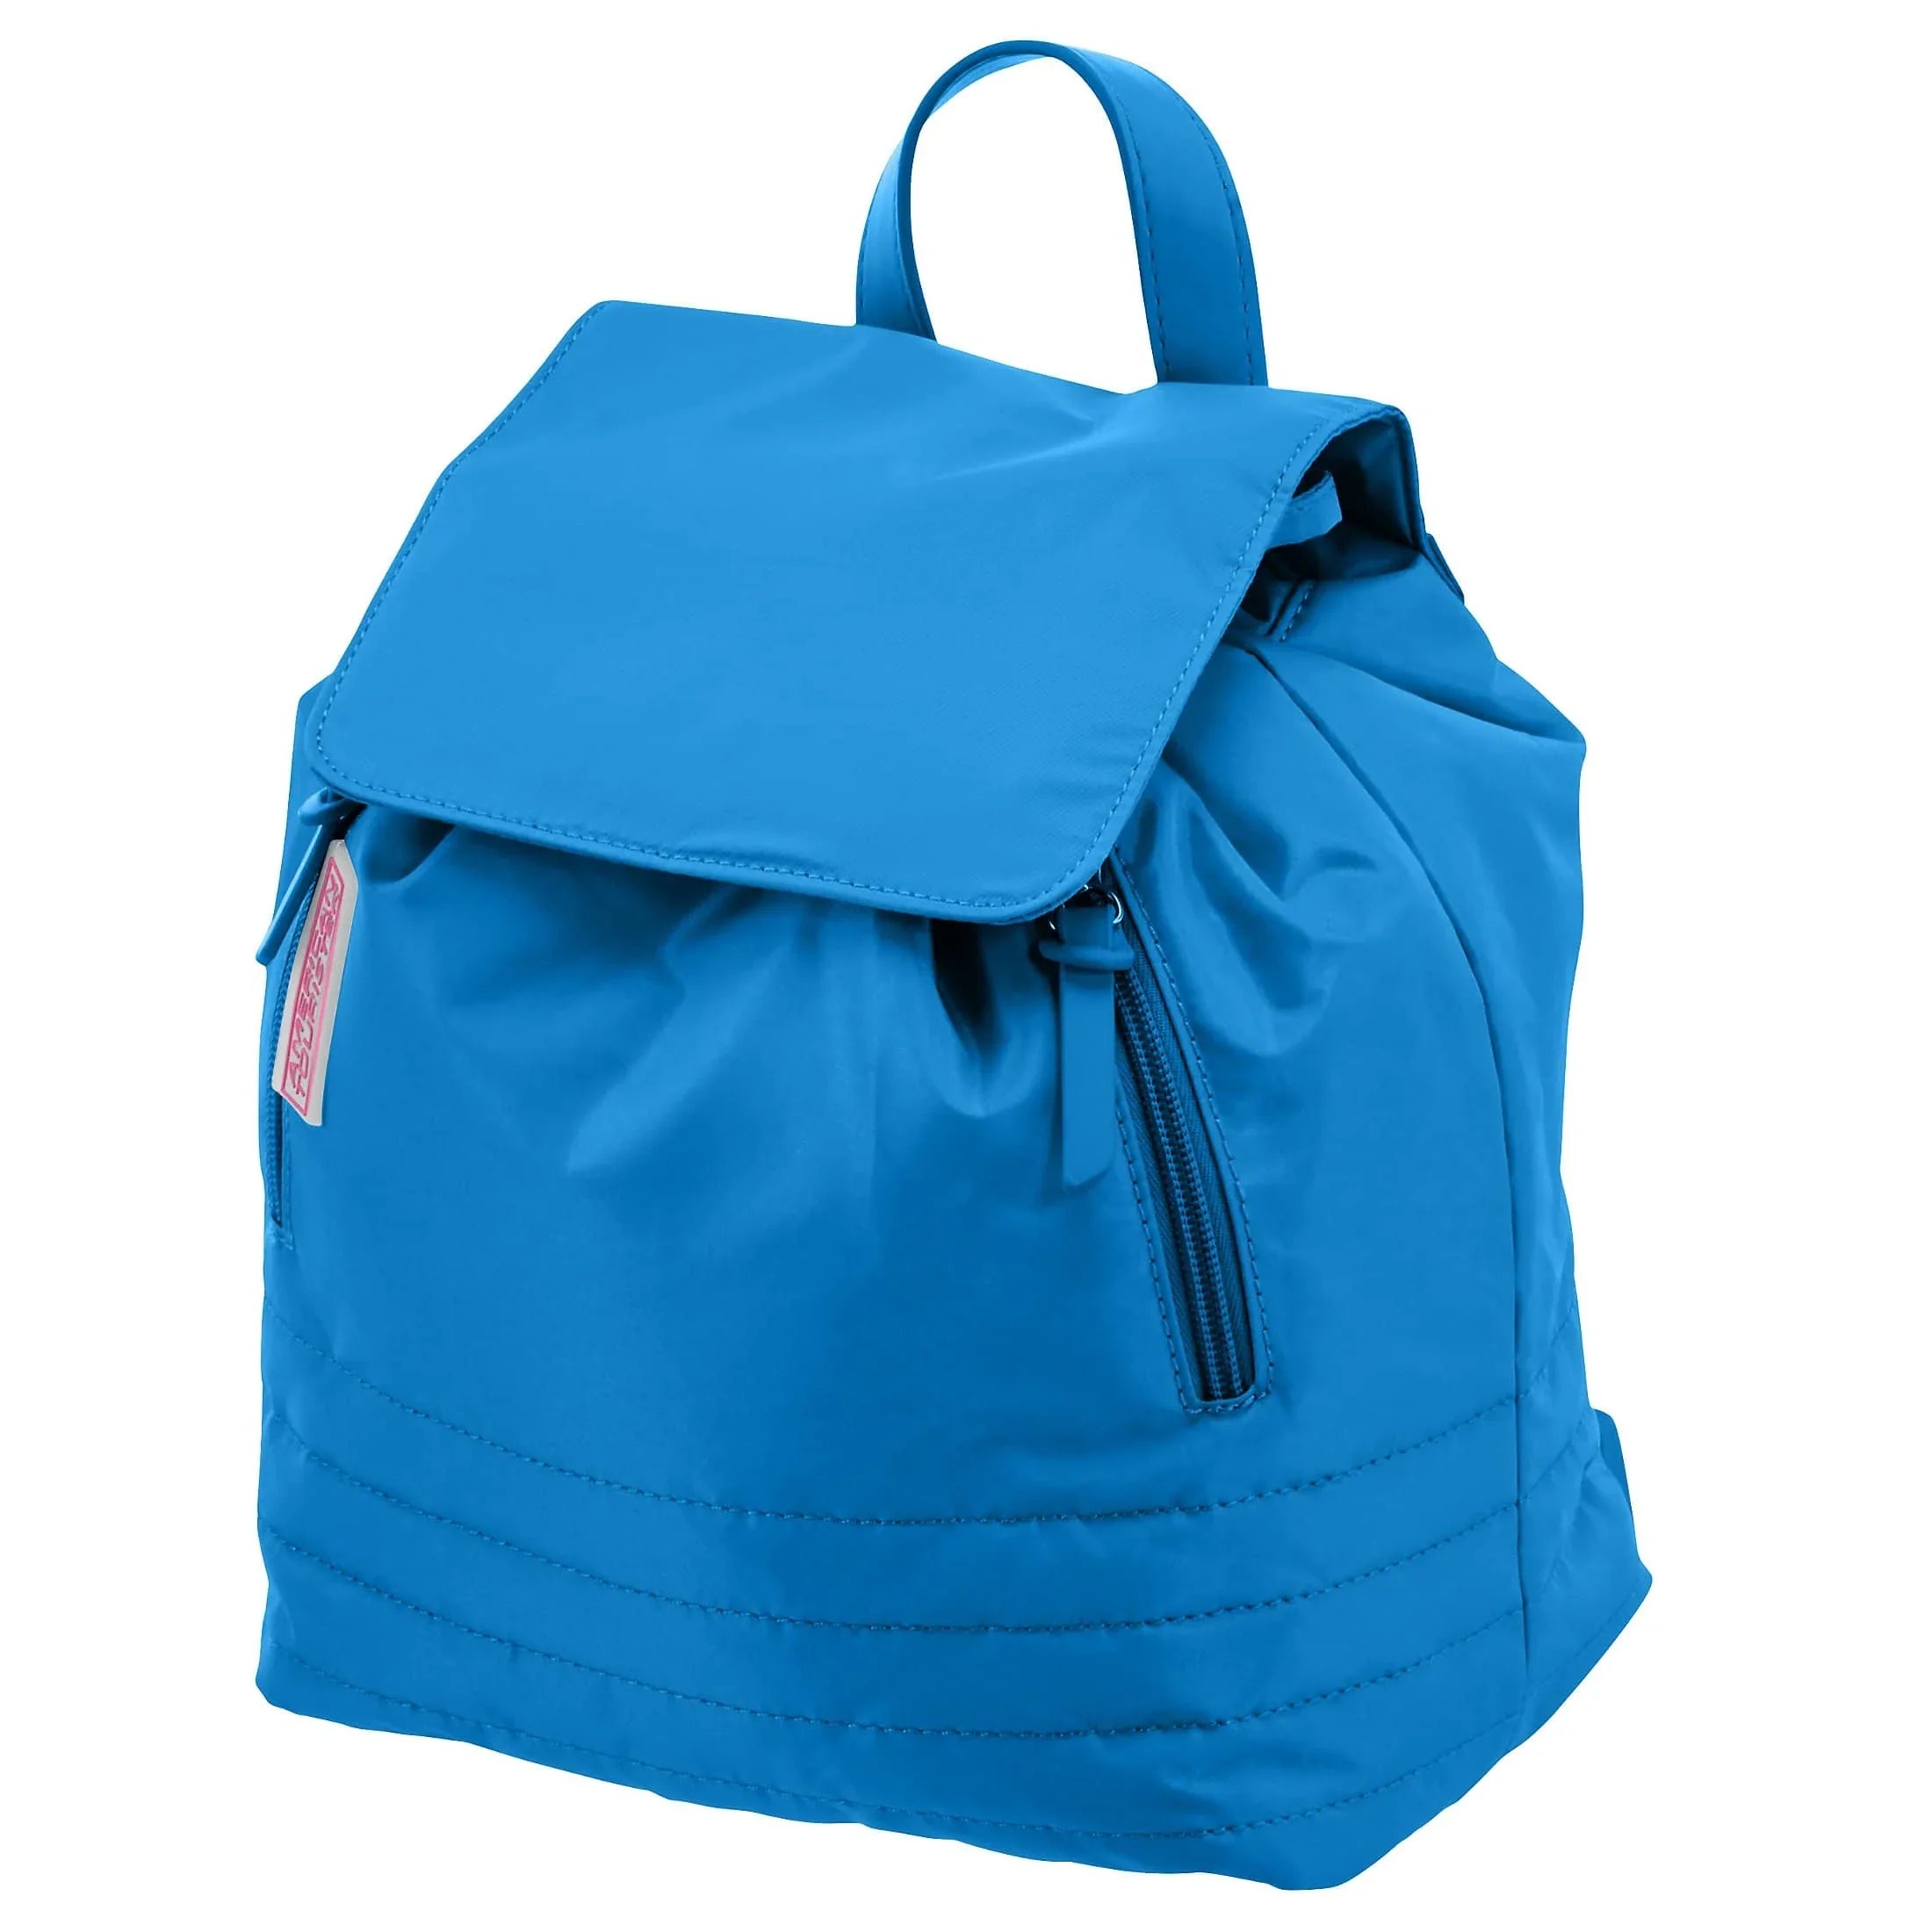 American Tourister Uptown Vibes Rucksack 25 cm - blue-pink